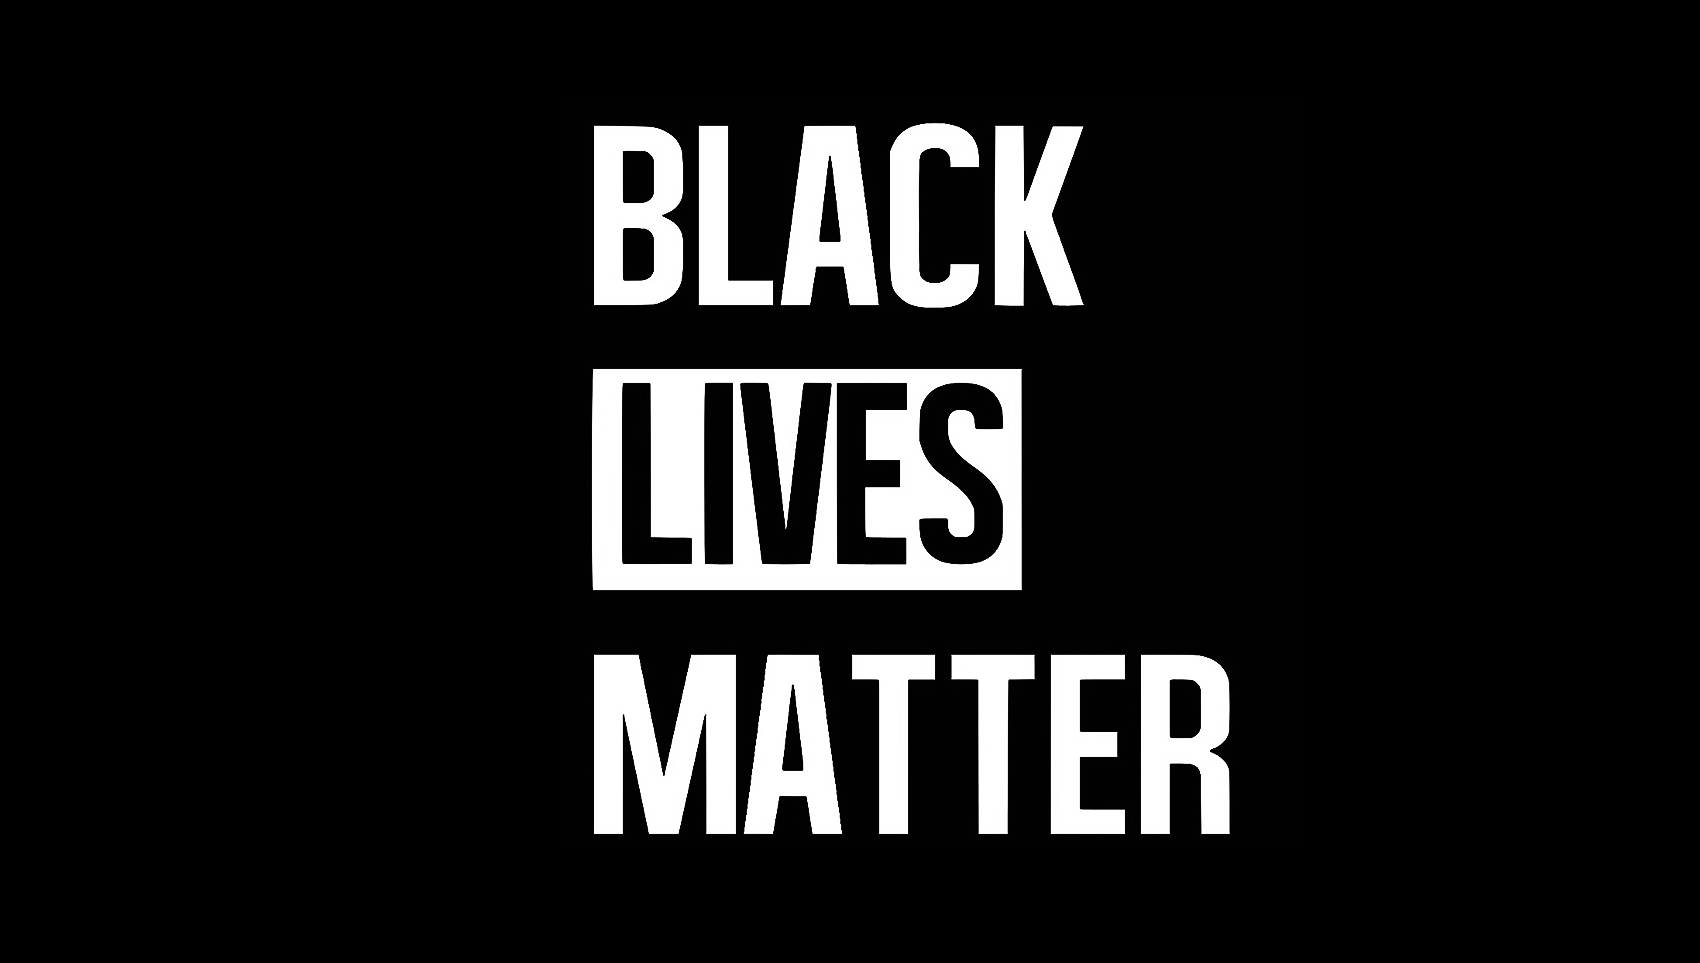 Black Lives Matter. Go Fuck Yourself If You Don’t Agree.